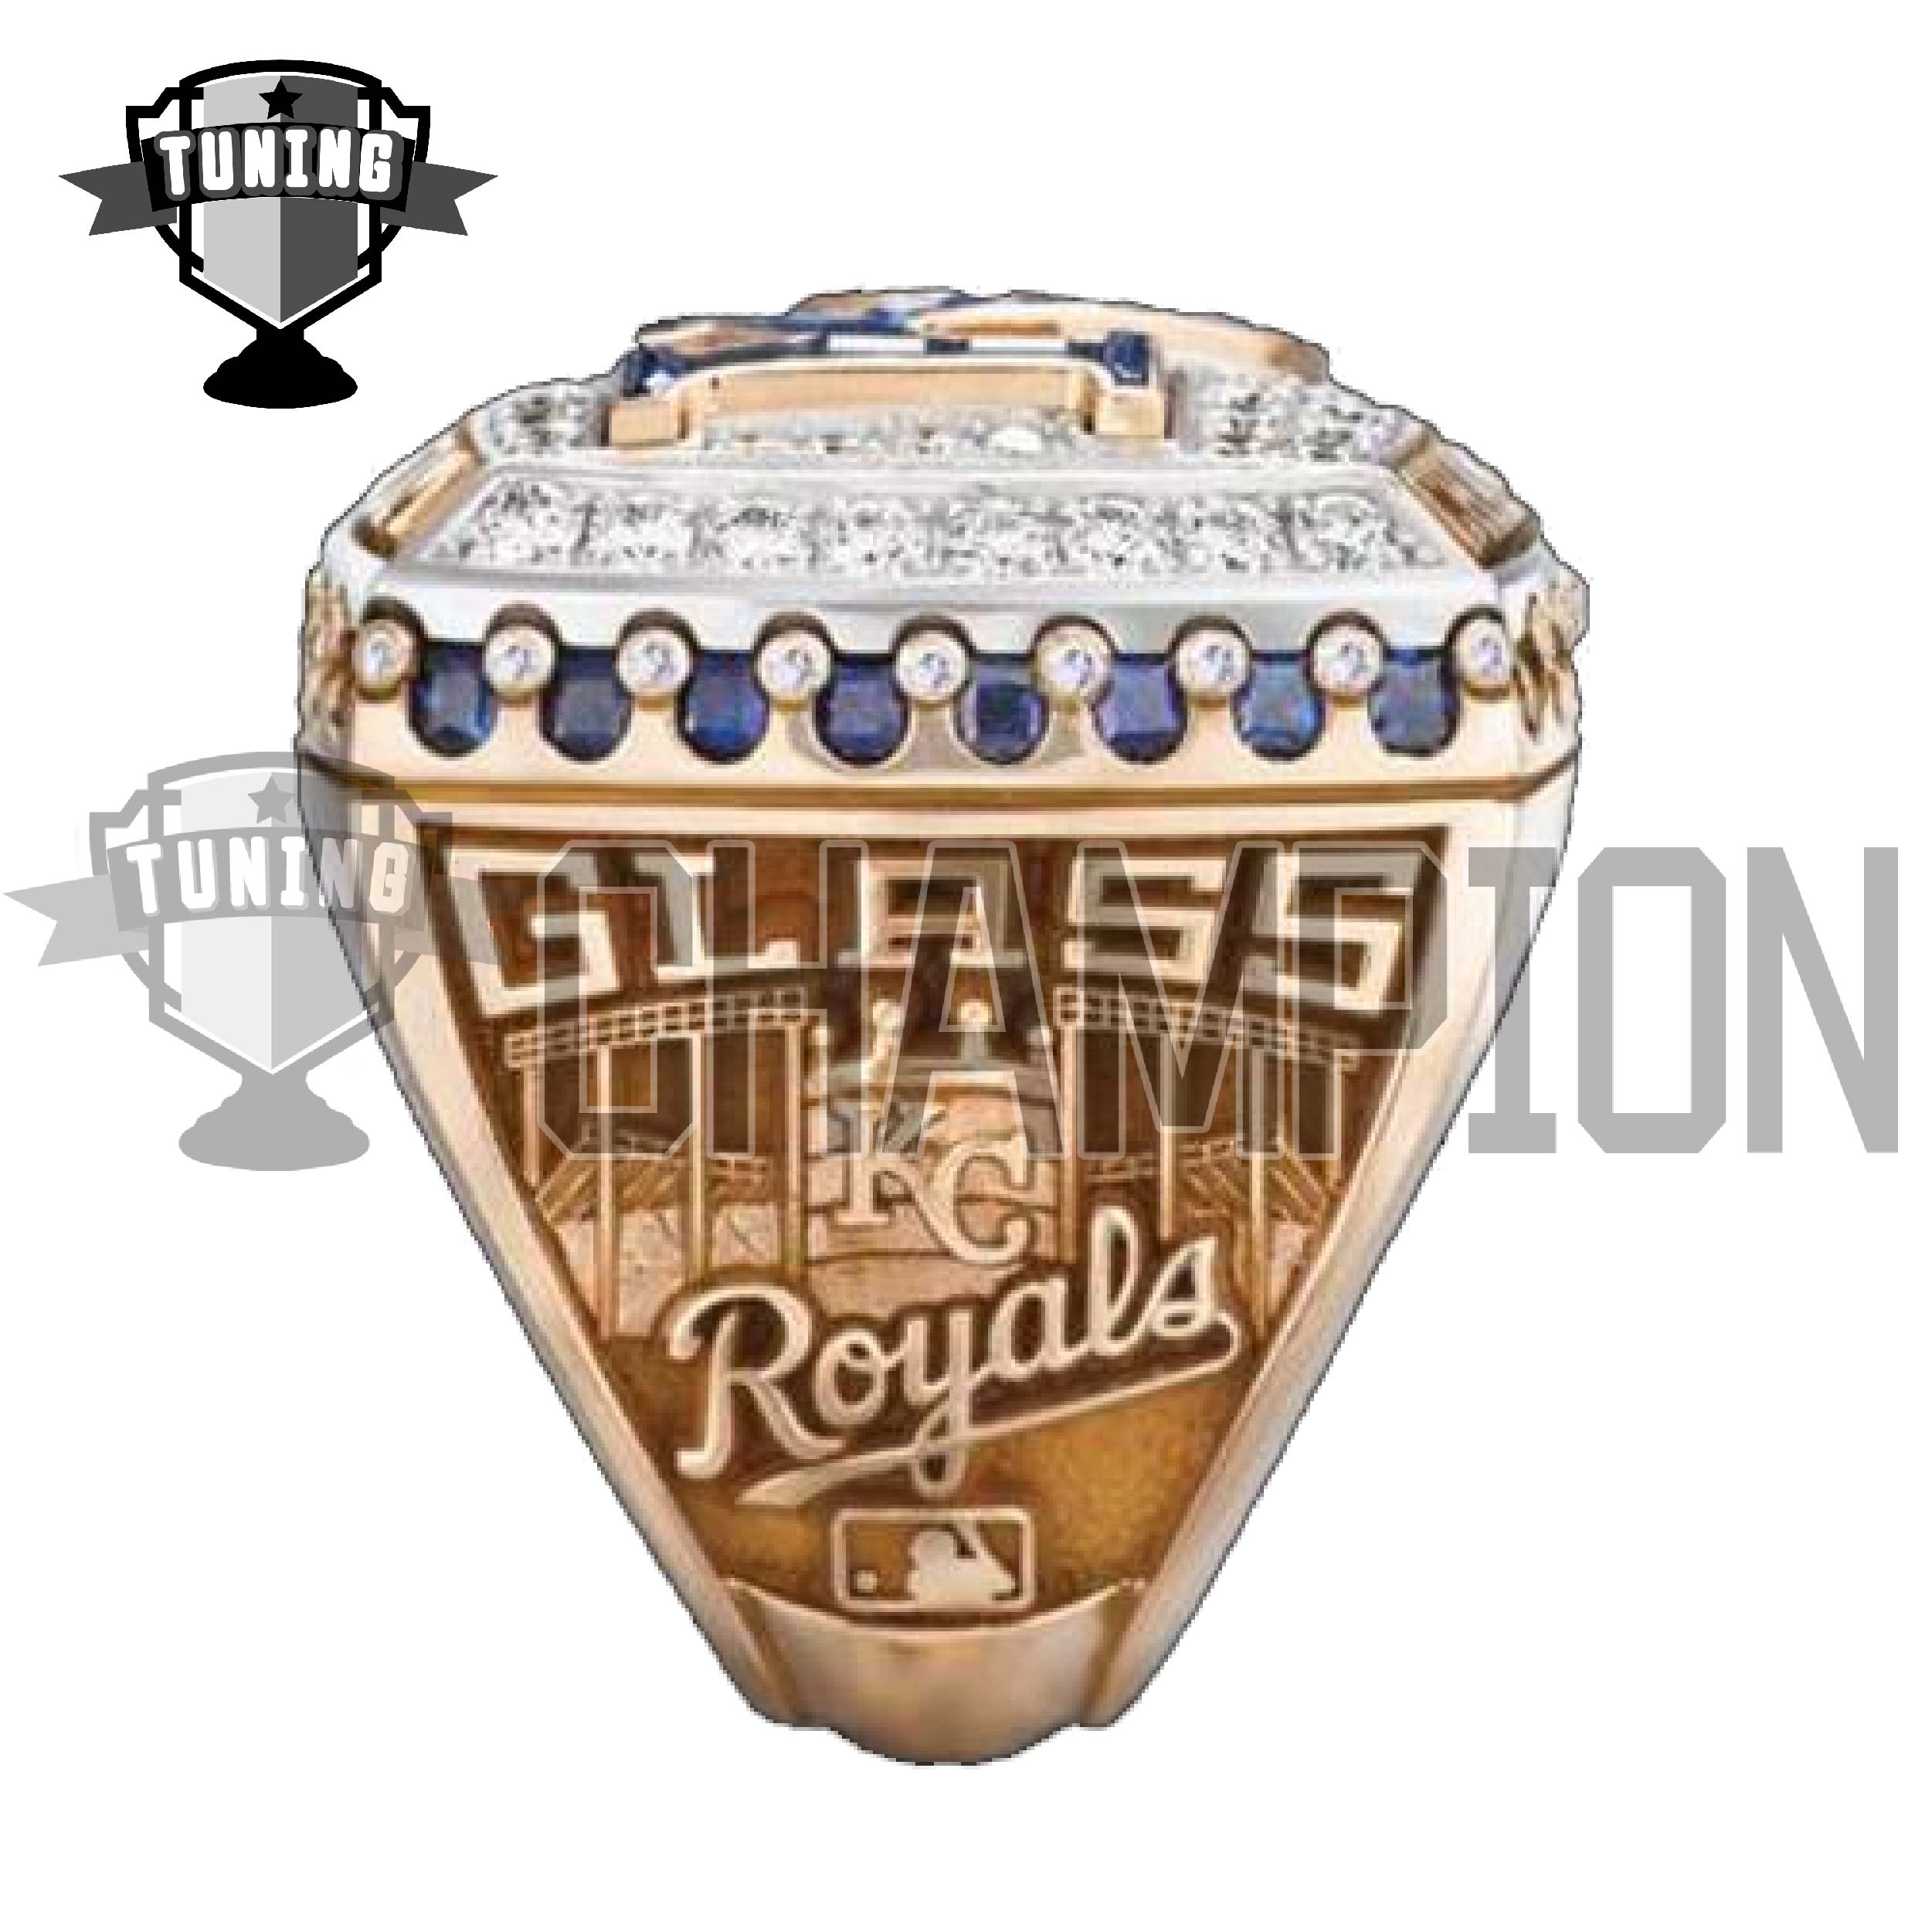 Check out the Royals' 2015 World Series rings